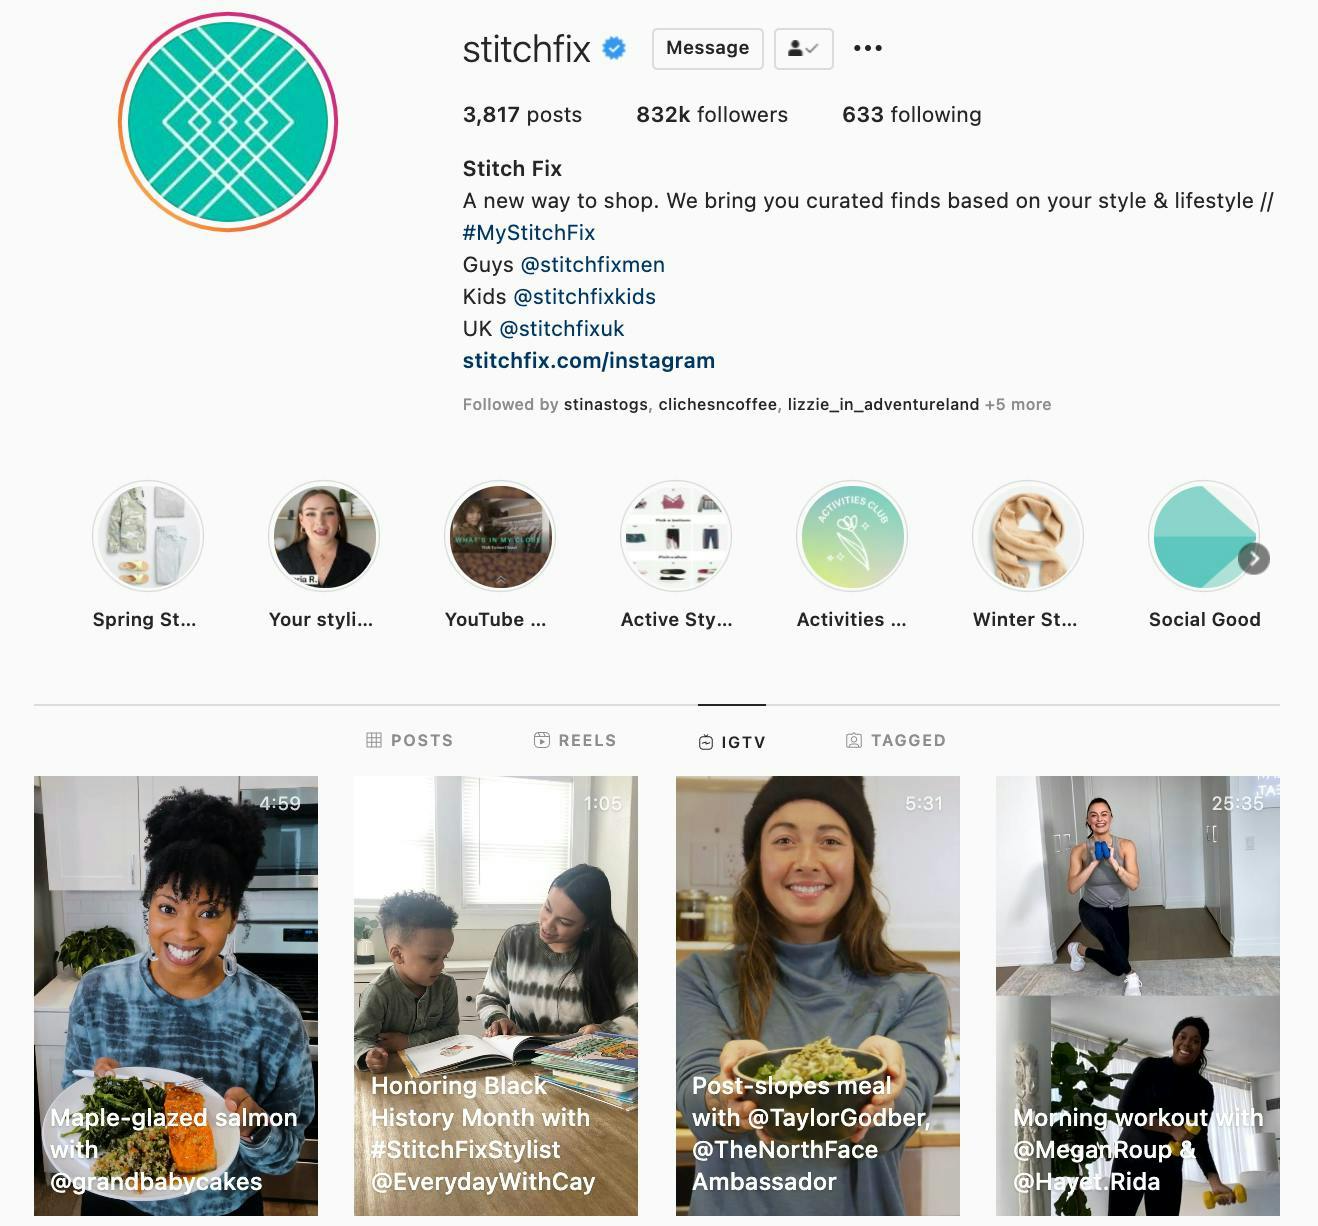 Example of a brand using IGTV as a way to highlight their brand ambassadors